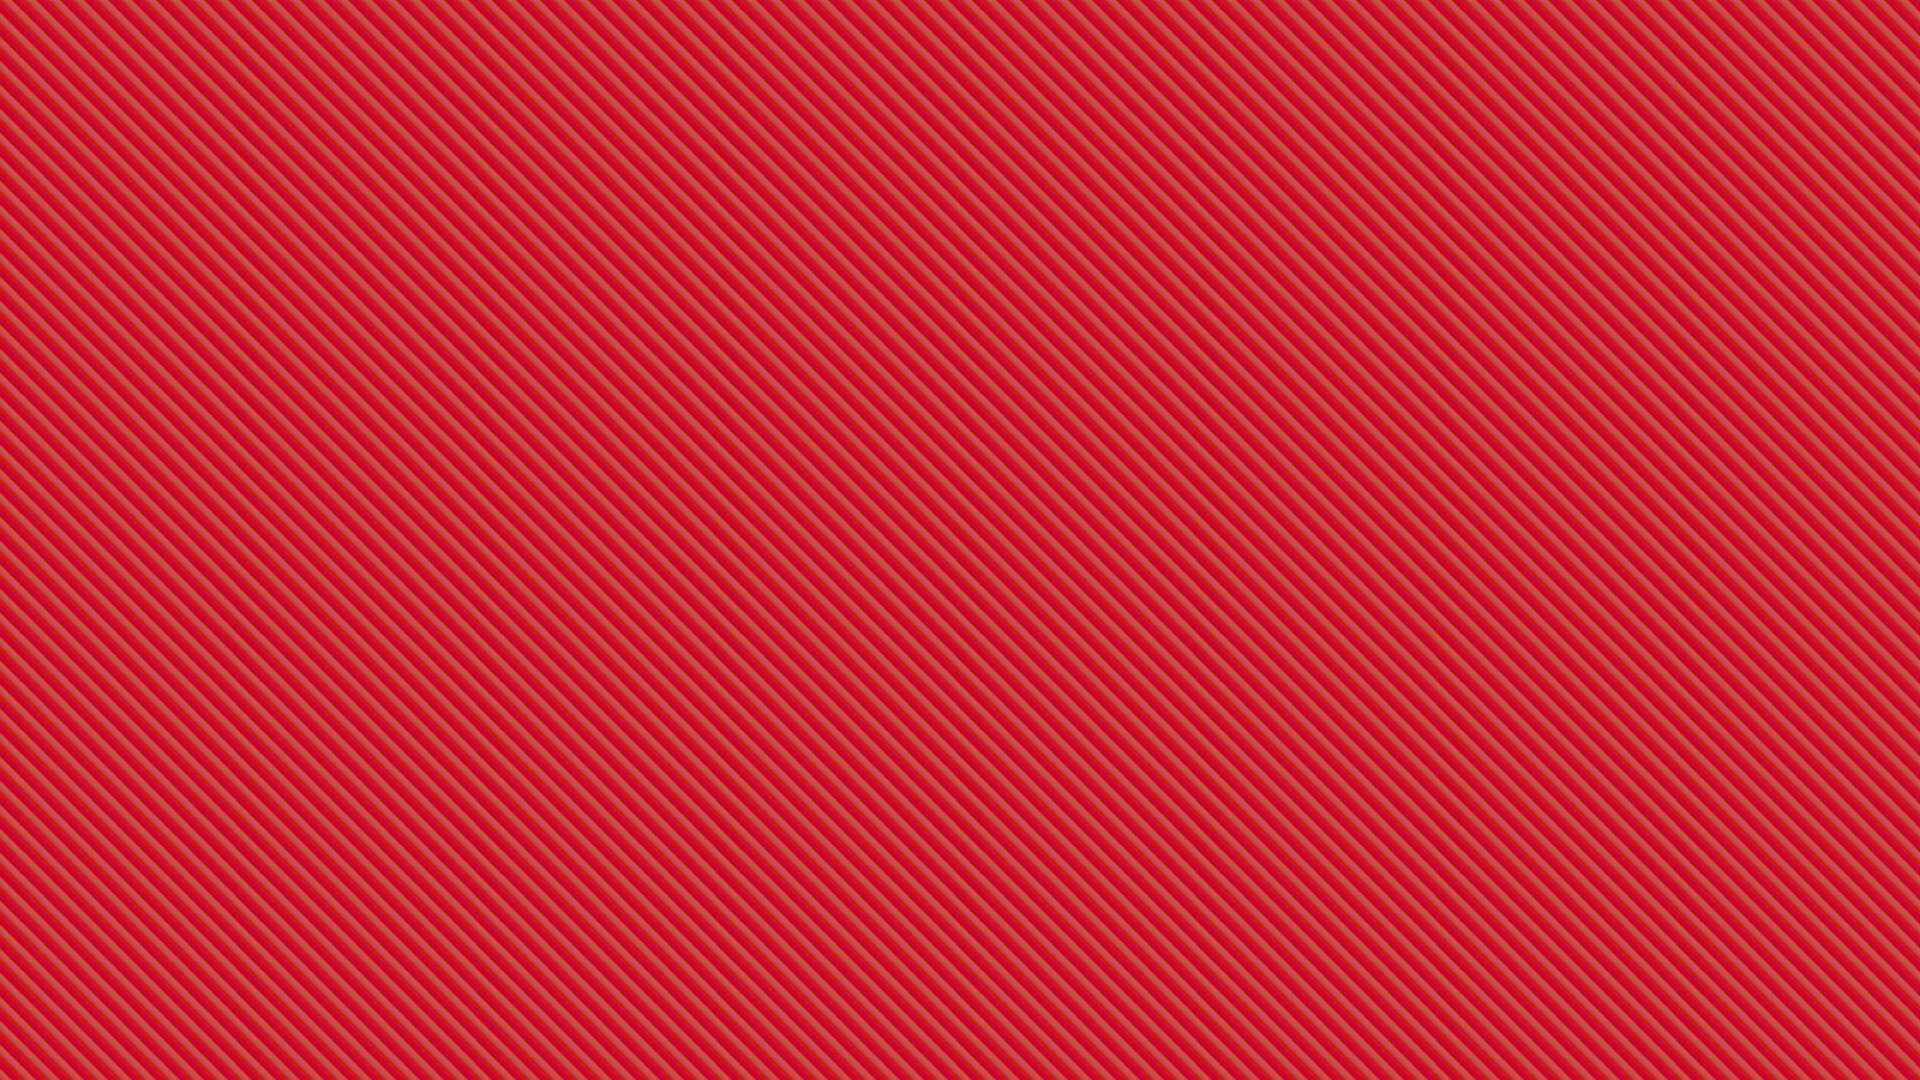 Red and White Striped Textile. Wallpaper in 1920x1080 Resolution